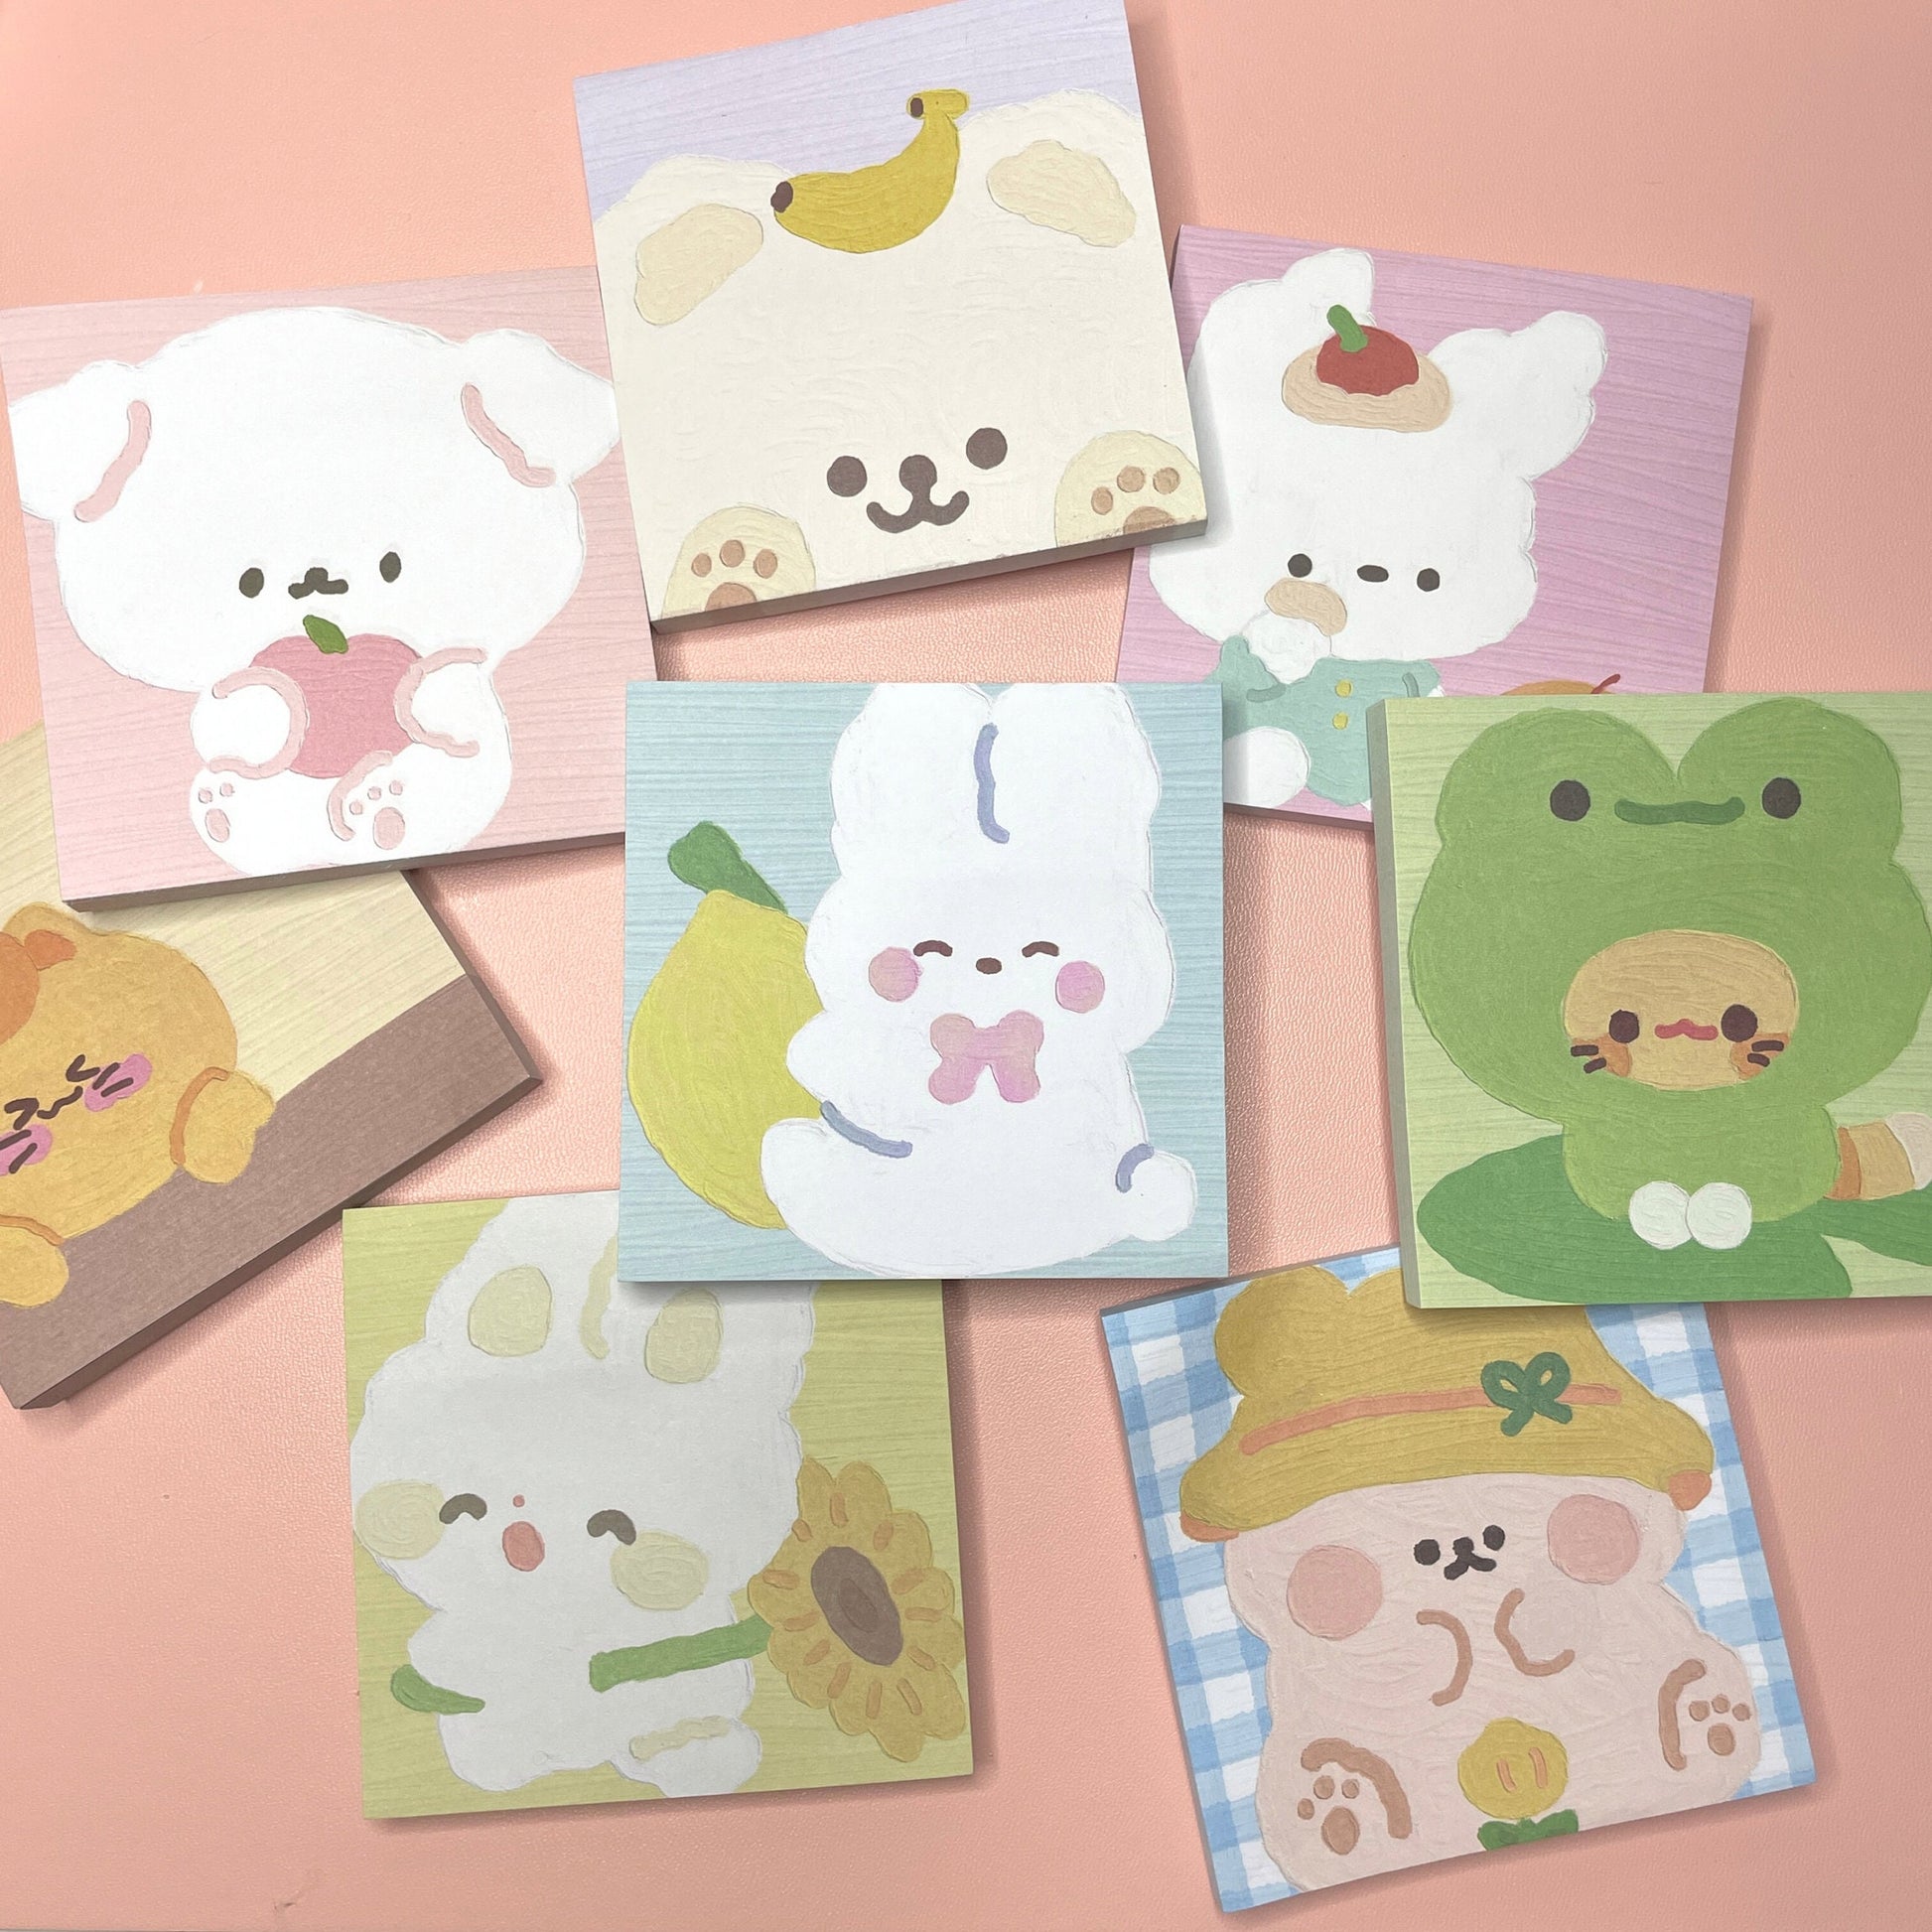 Oil Painting Cartoon Animal Sticky Notes, Study and Office Supplies, Kawaii Stationery, Memo Pad, To Do List, Check List, 80 Pages